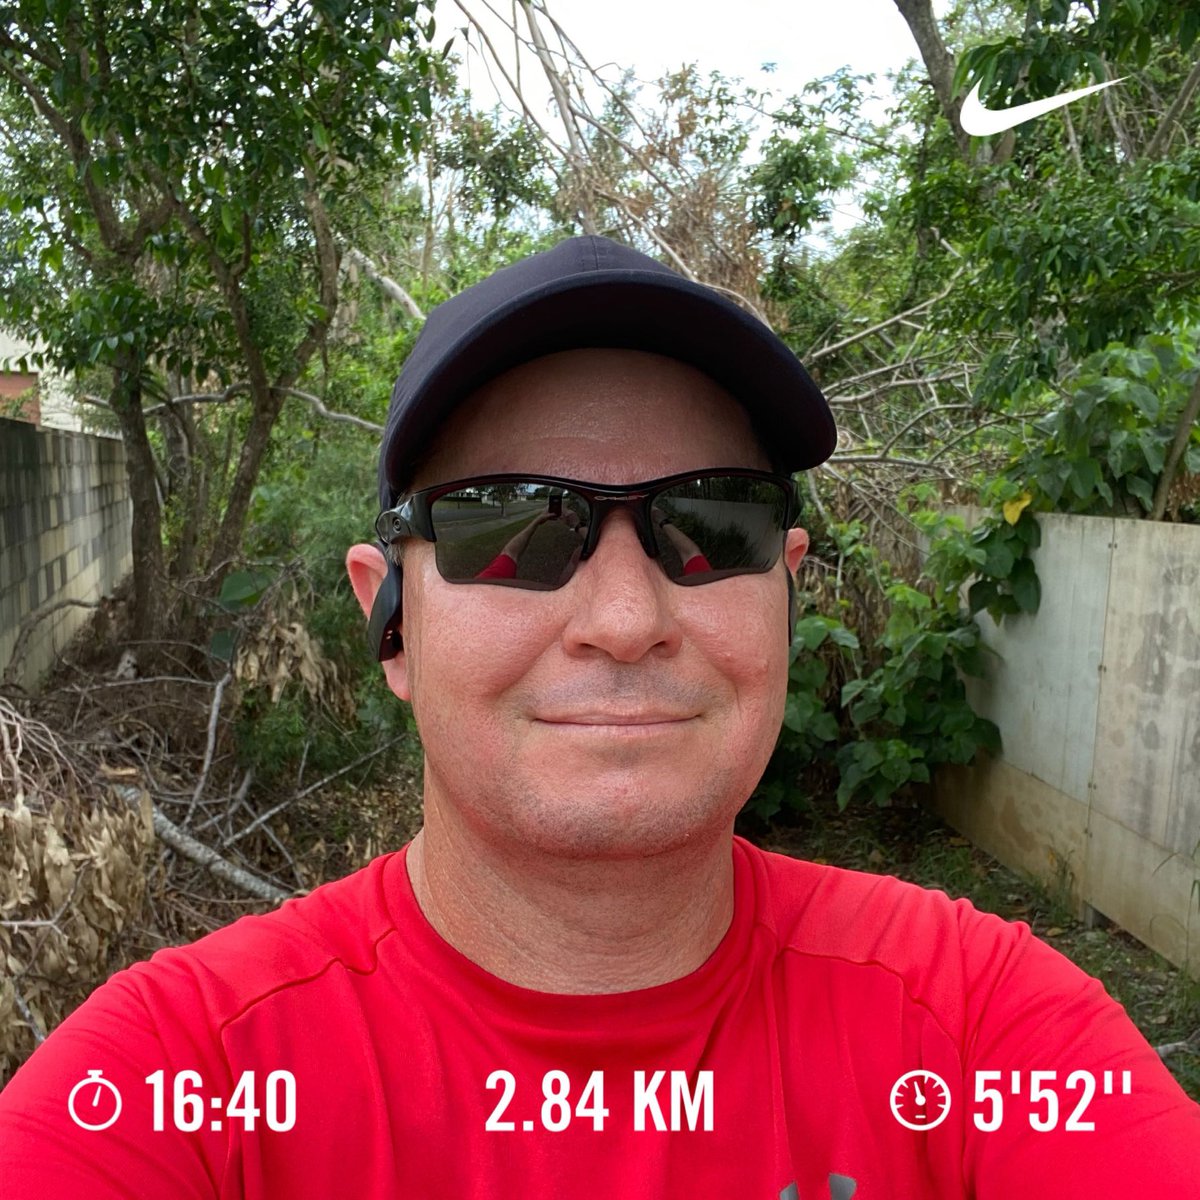 I’ve been really laid low by my asthma for the last week so it was great to get out there and run for 1000 seconds! It was even better with ⁦@bennettrun⁩ & ⁦@DanielTheEnginr⁩ in my ears. #everyrunhasapurpose